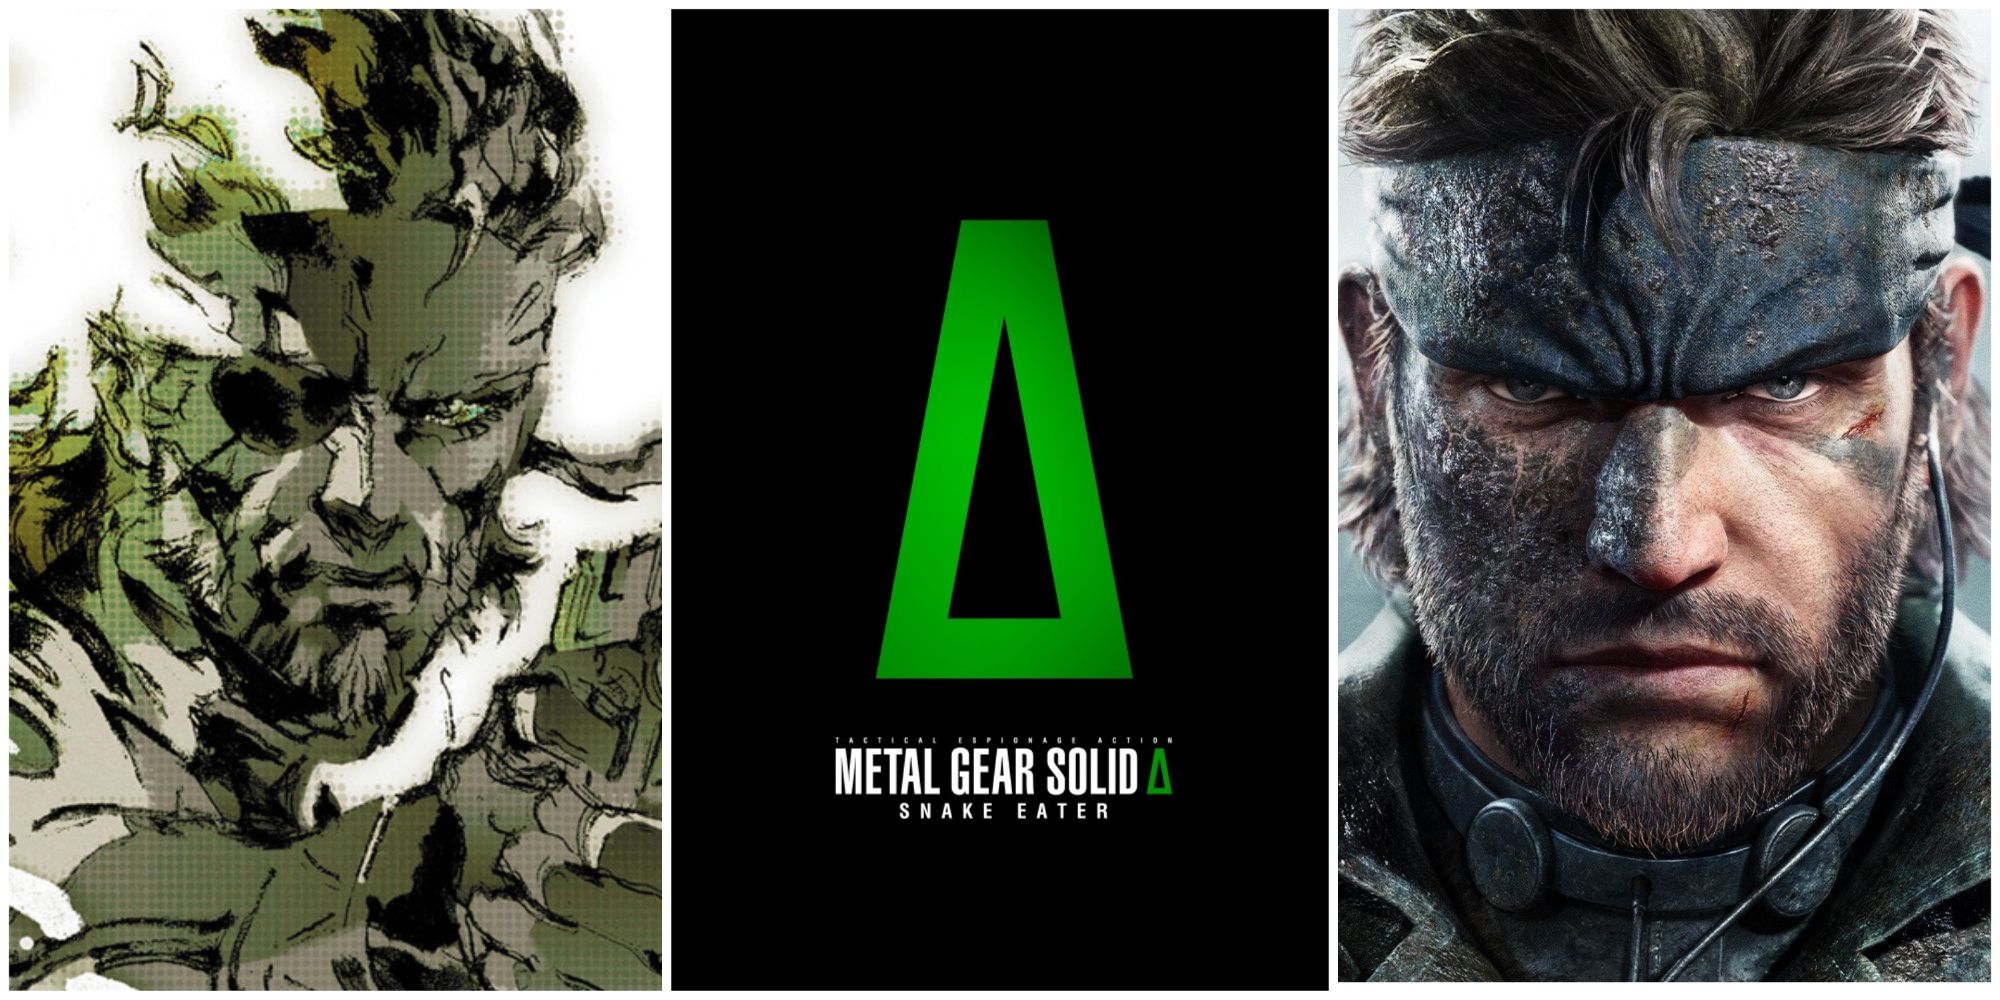 Metal Gear Solid Snake Eater release date, delta meaning